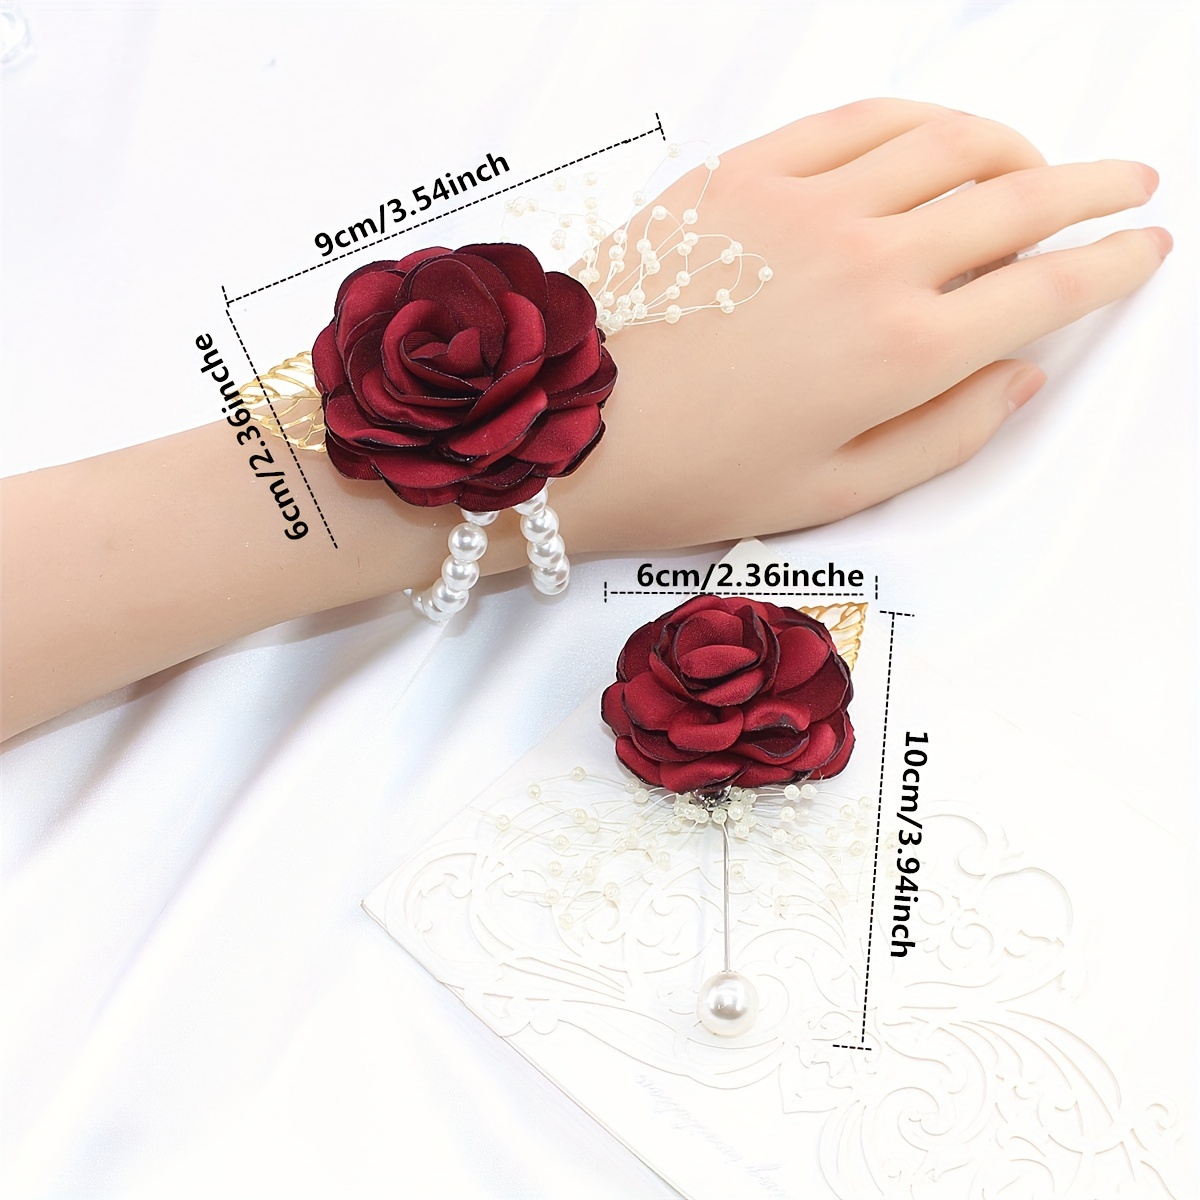 4pcs Artificial Peony Wrist Corsages for Wedding, Bridesmaid Band Bracelet  for Wedding Wrist Flower Mother of Bride and Groom, Party Proom Flowers